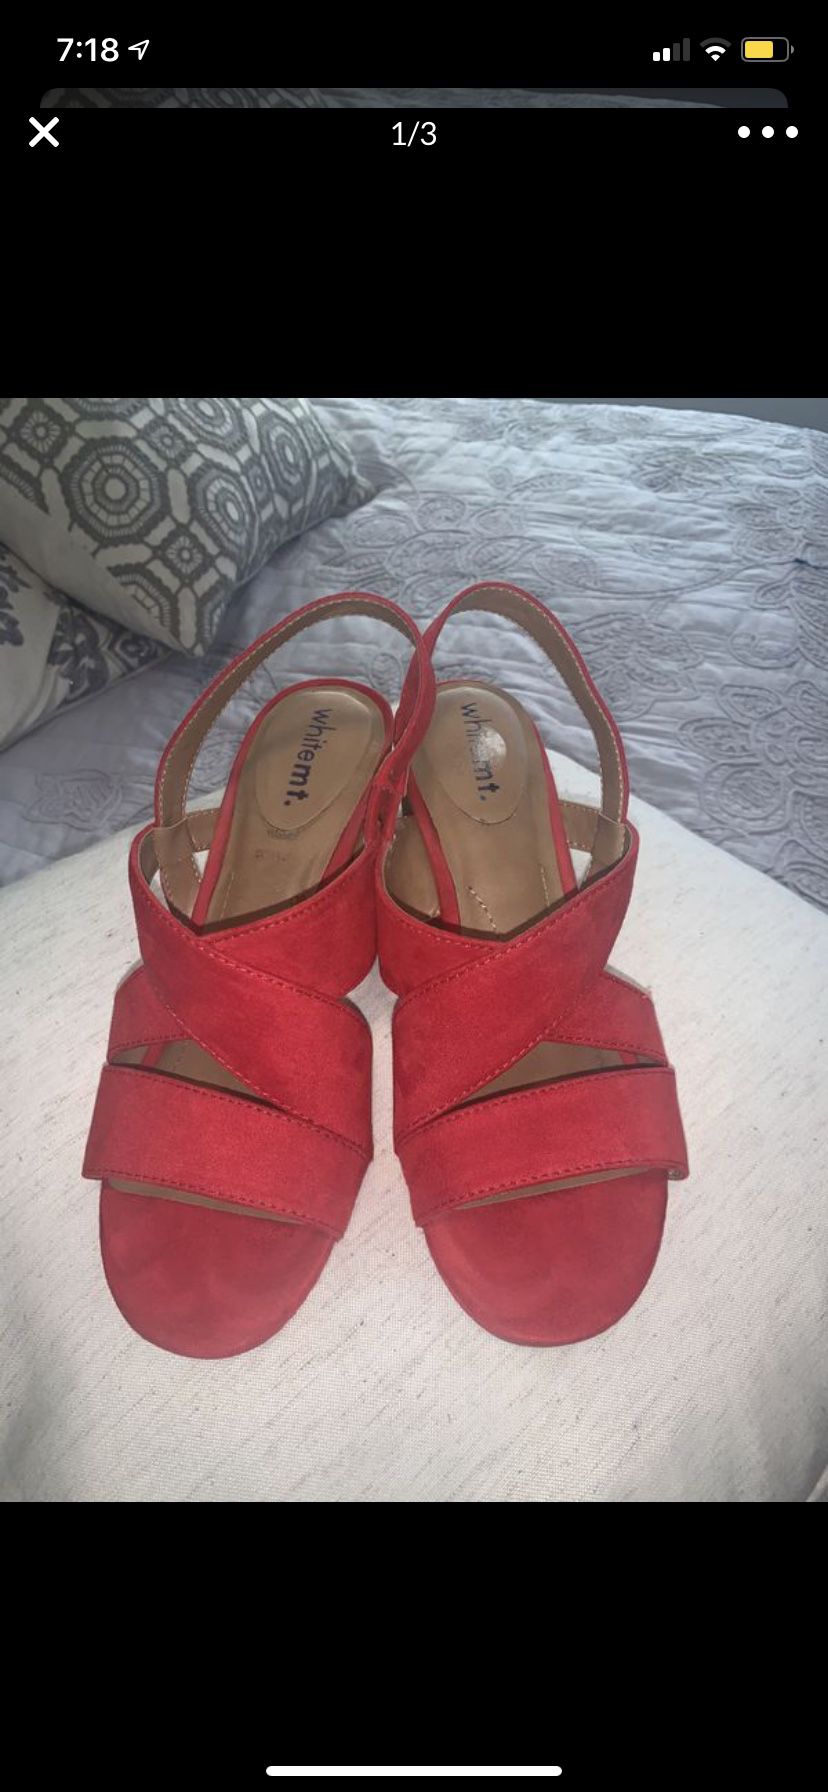 White Mountain Size 8 Red Heels